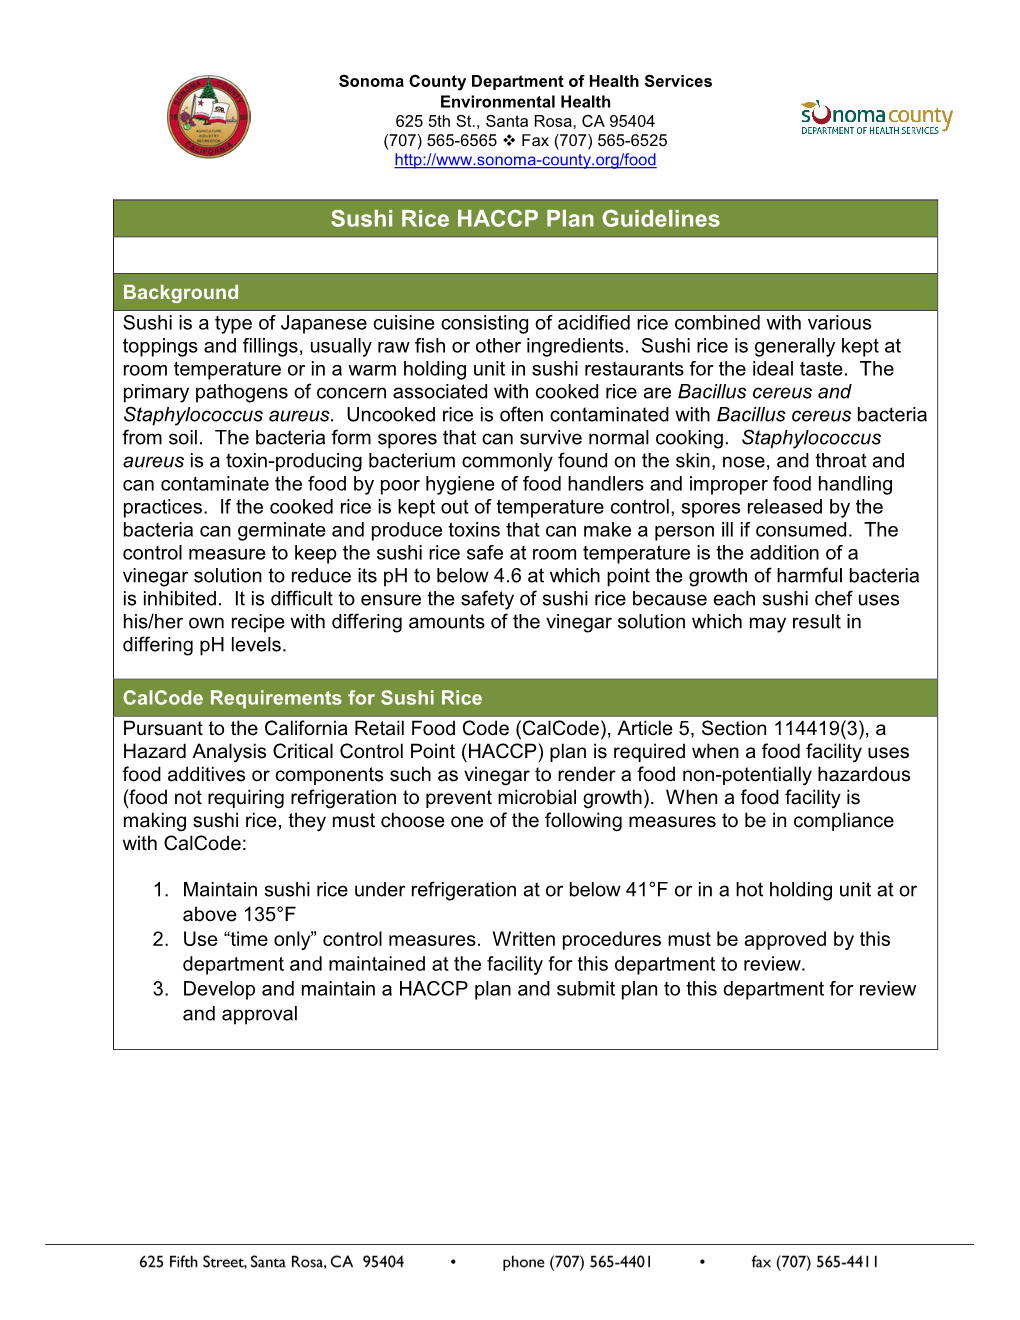 Download a PDF of the Sushi Rice HACCP Guidelines